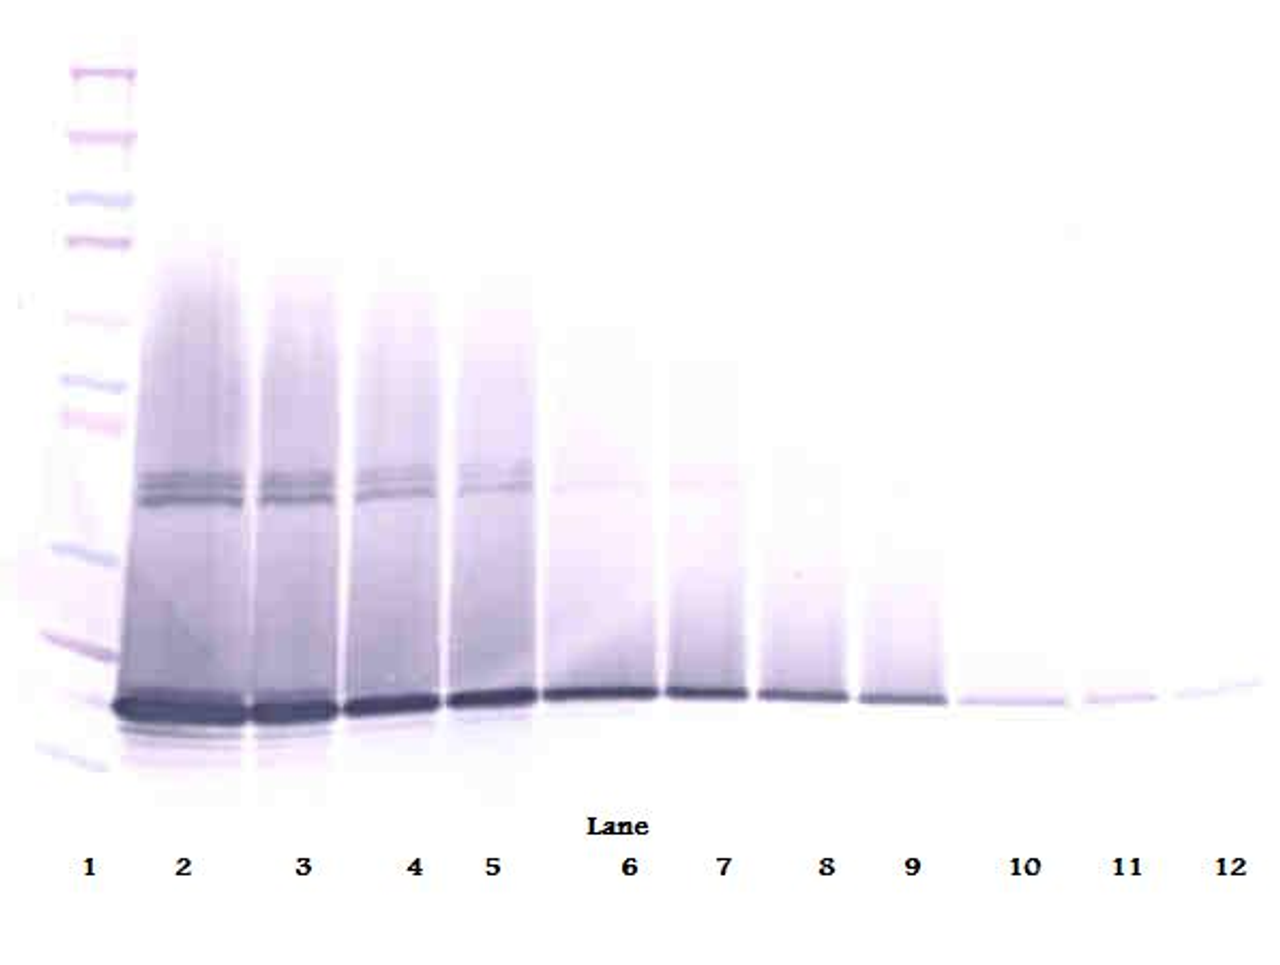 To detect mG-CSF by Western Blot analysis this antibody can be used at a concentration of 0.1-0.2 ug/ml. Used in conjunction with compatible secondary reagents the detection limit for recombinant mG-CSF is 1.5-3.0 ng/lane, under either reducing or non-reducing conditions.